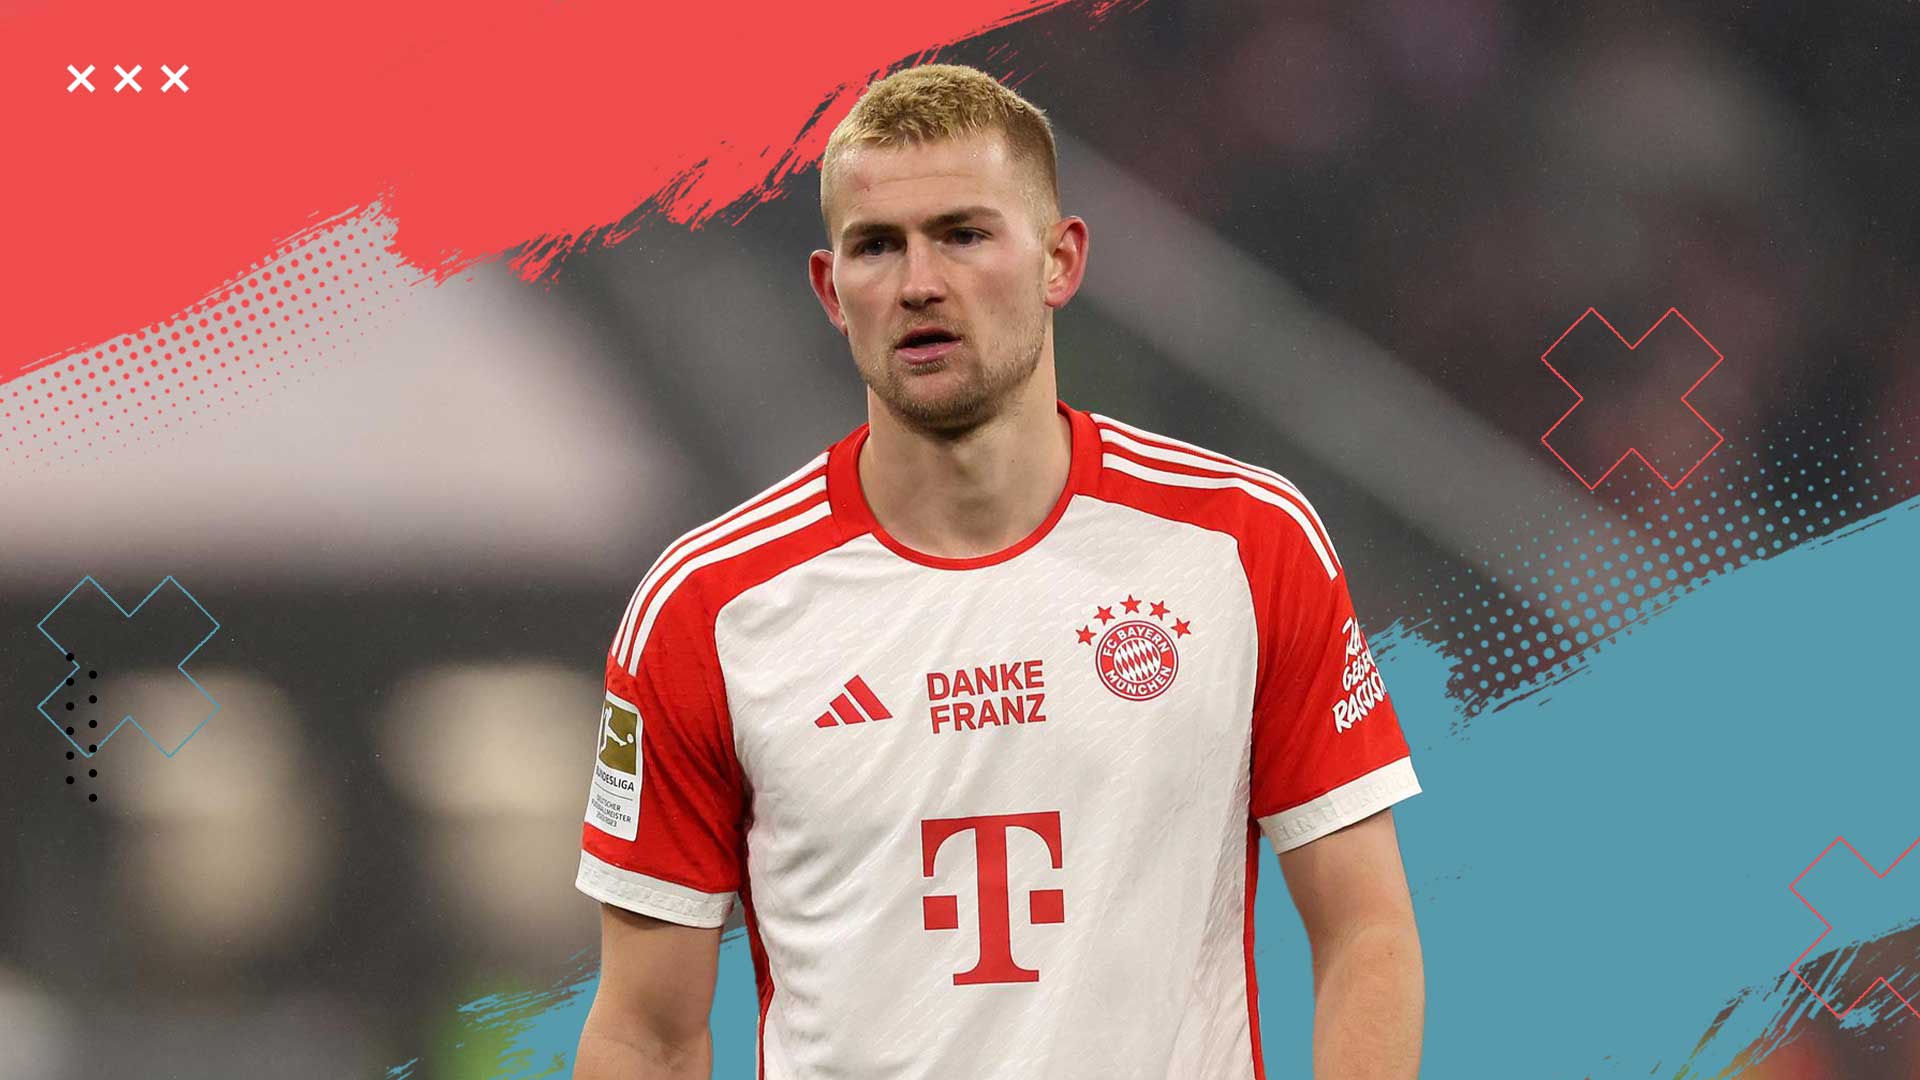 How Good is Matthijs de Ligt, and What Lies Ahead for Him at Man Utd?